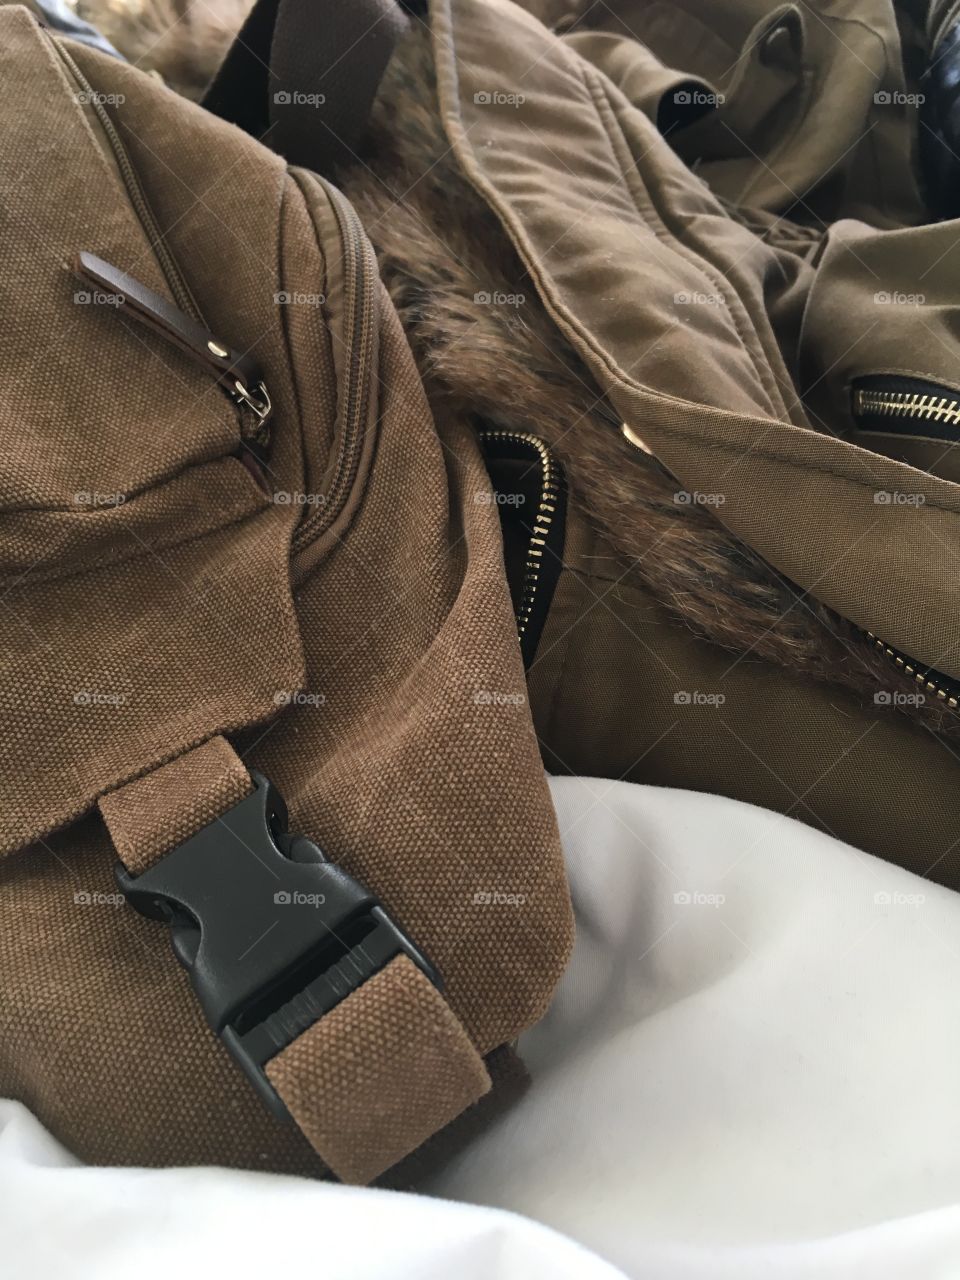 Brown bag and fur lined jacket close up